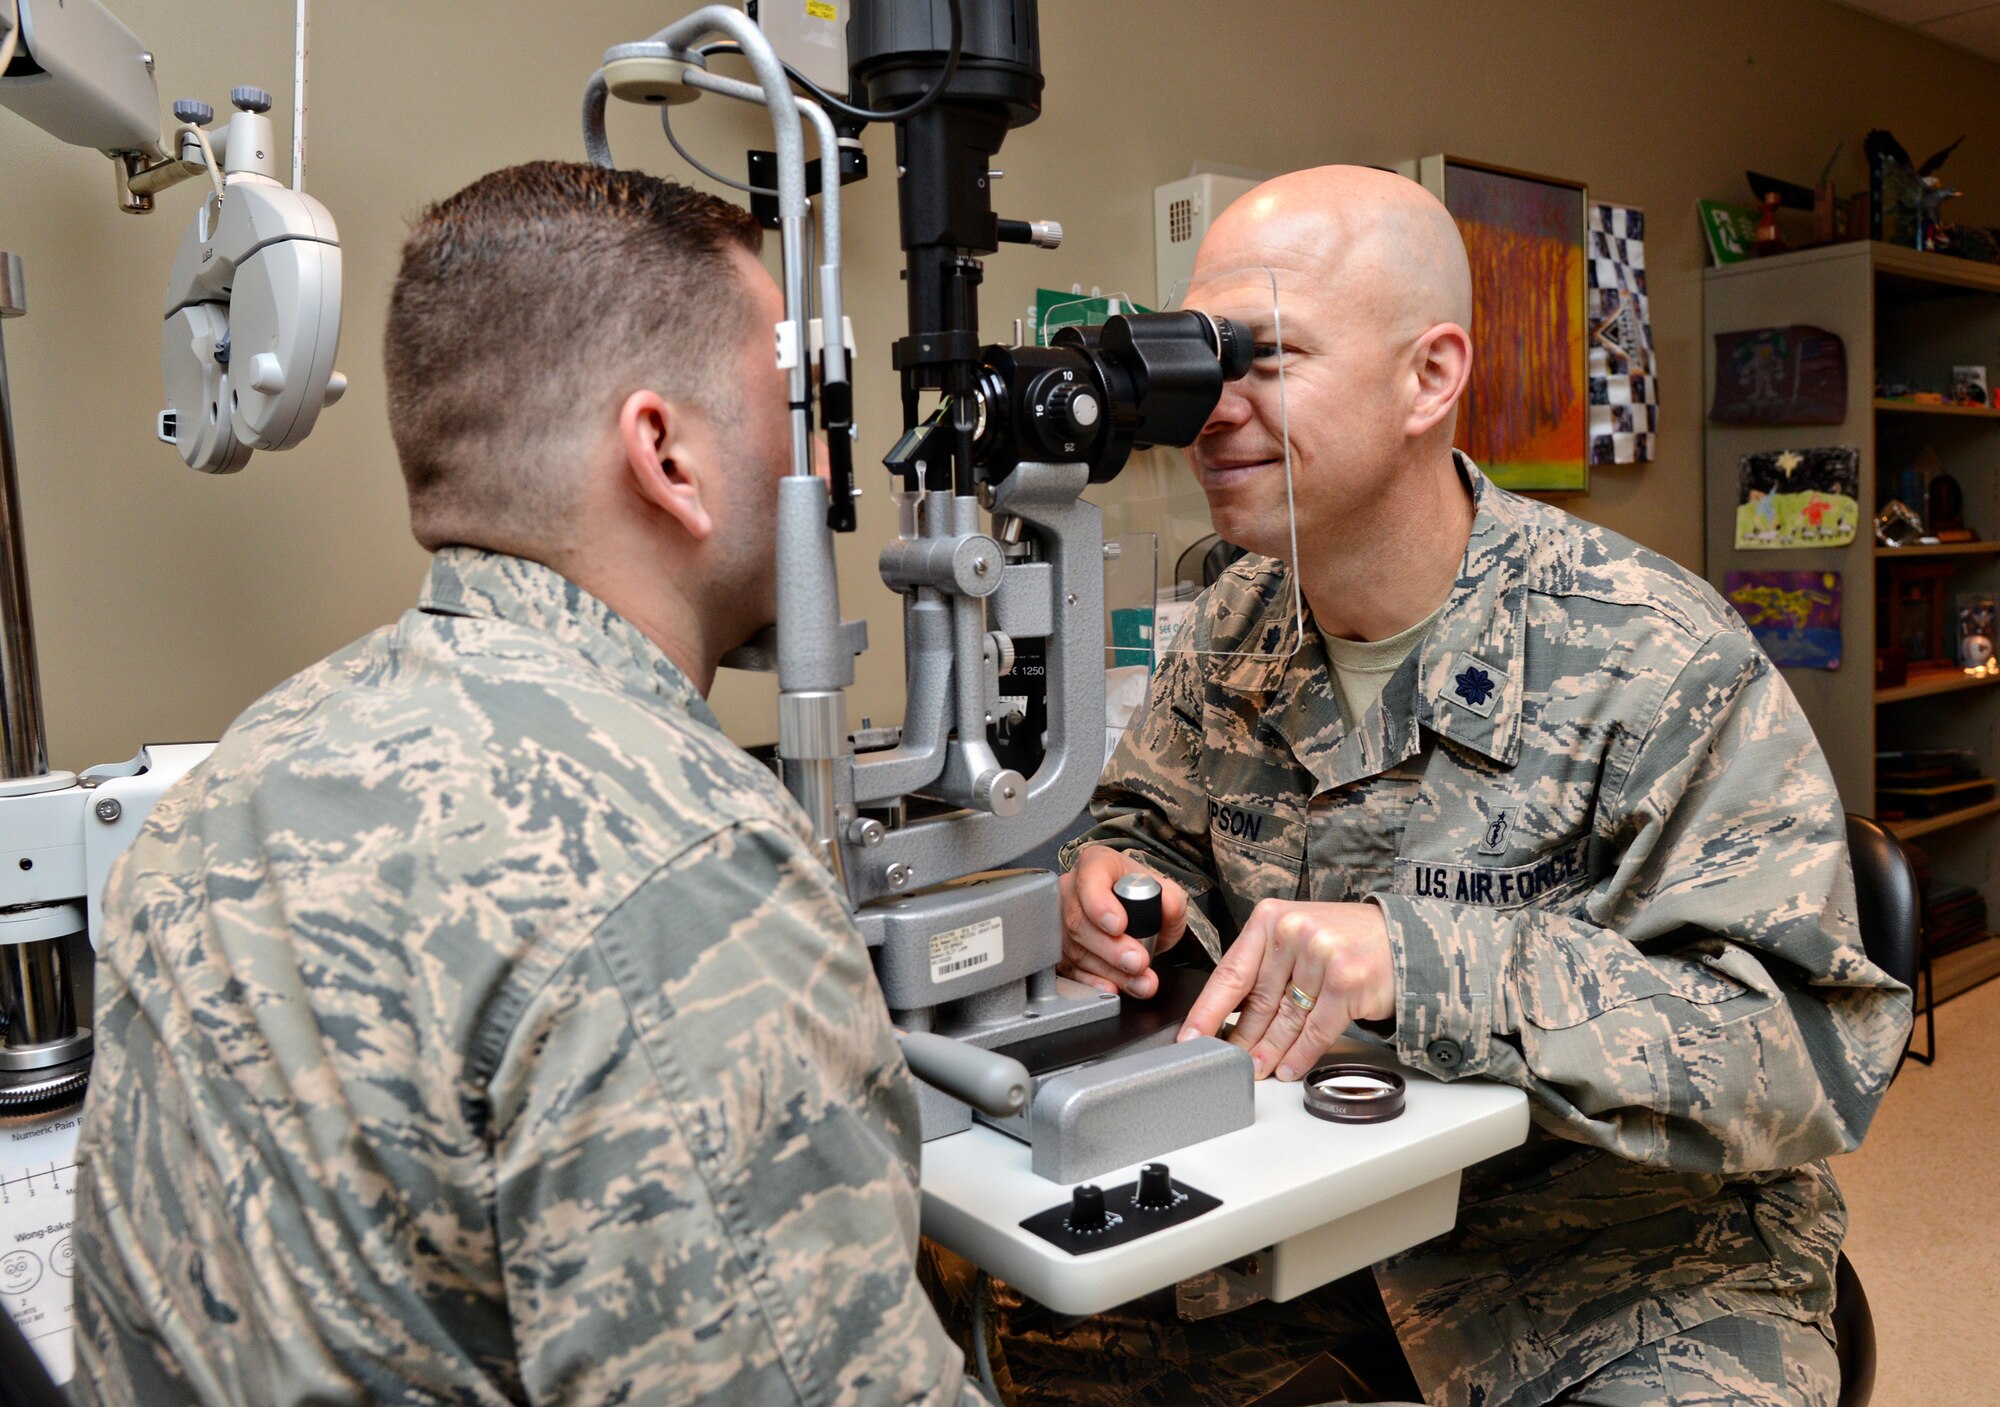 Lt. Col. Chad Simpson, the optometry flight commander with the 72nd Aerospace Medicine Squadron, performs a routine eye exam on Capt. Miles Stutes, a physical therapist with the 72nd Medical Operations Squadron. (Air Force photo by Kelly White)